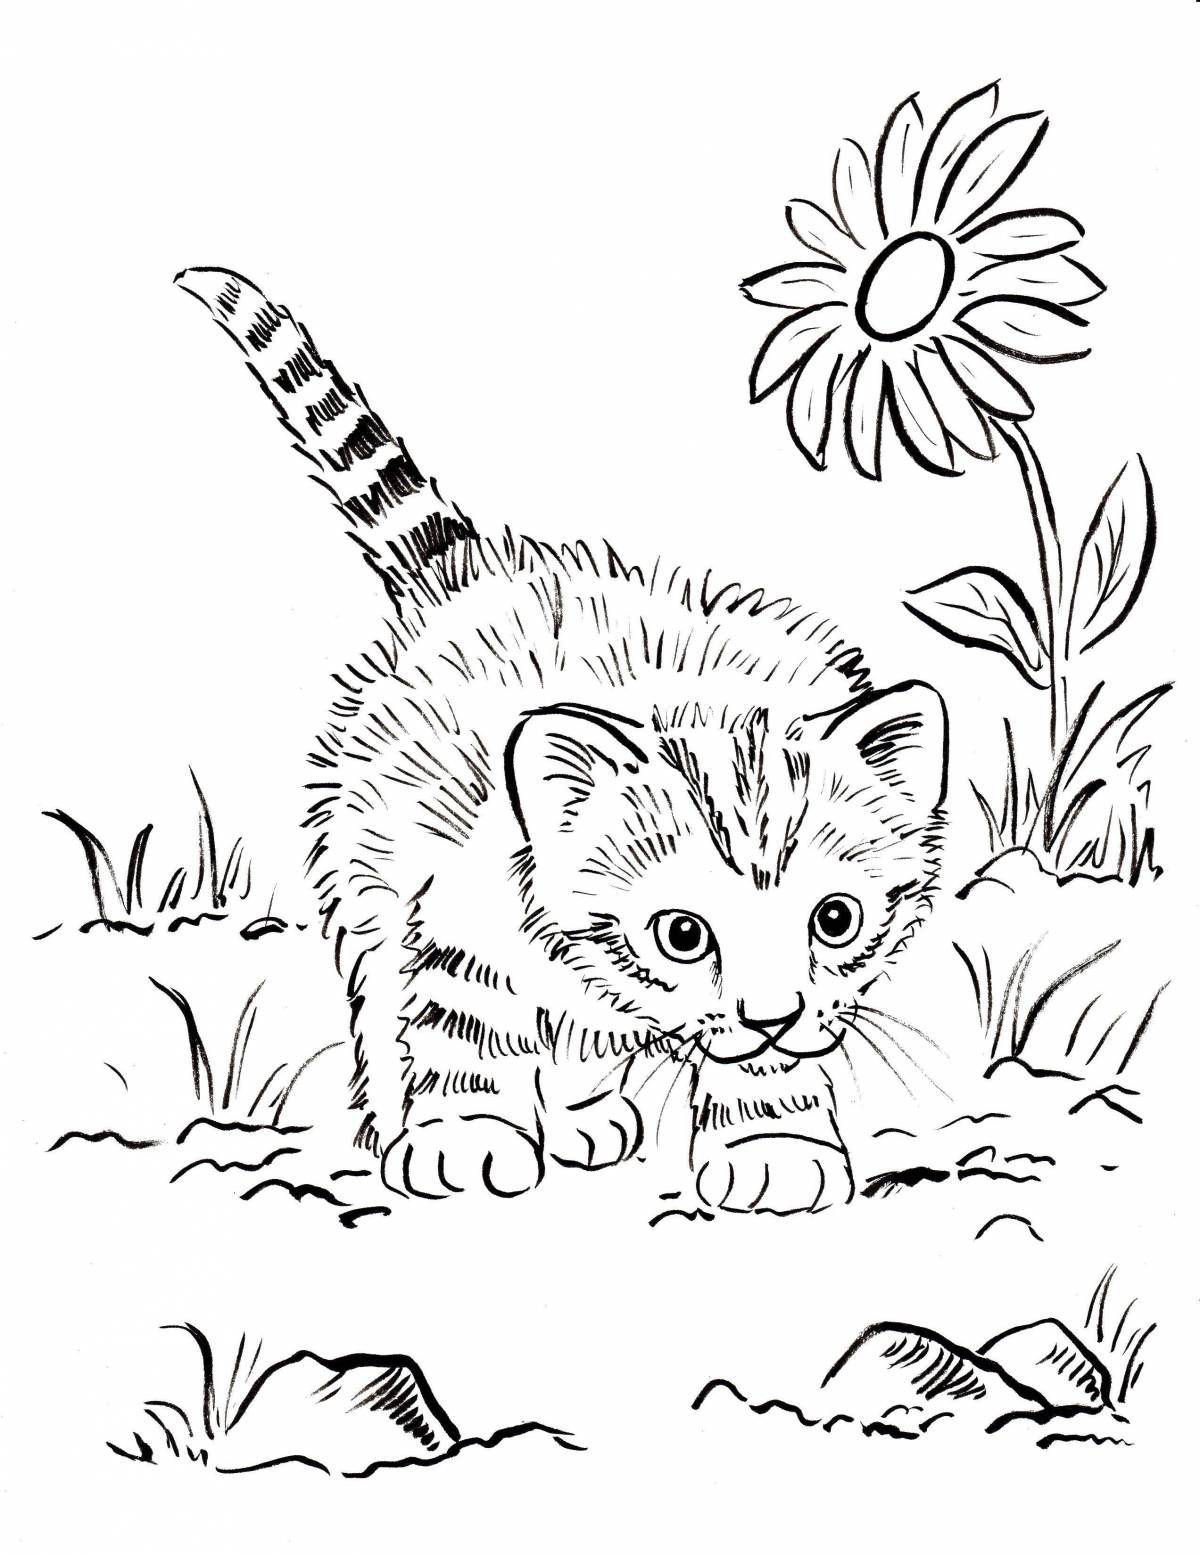 Cute cat coloring book for kids 6-7 years old